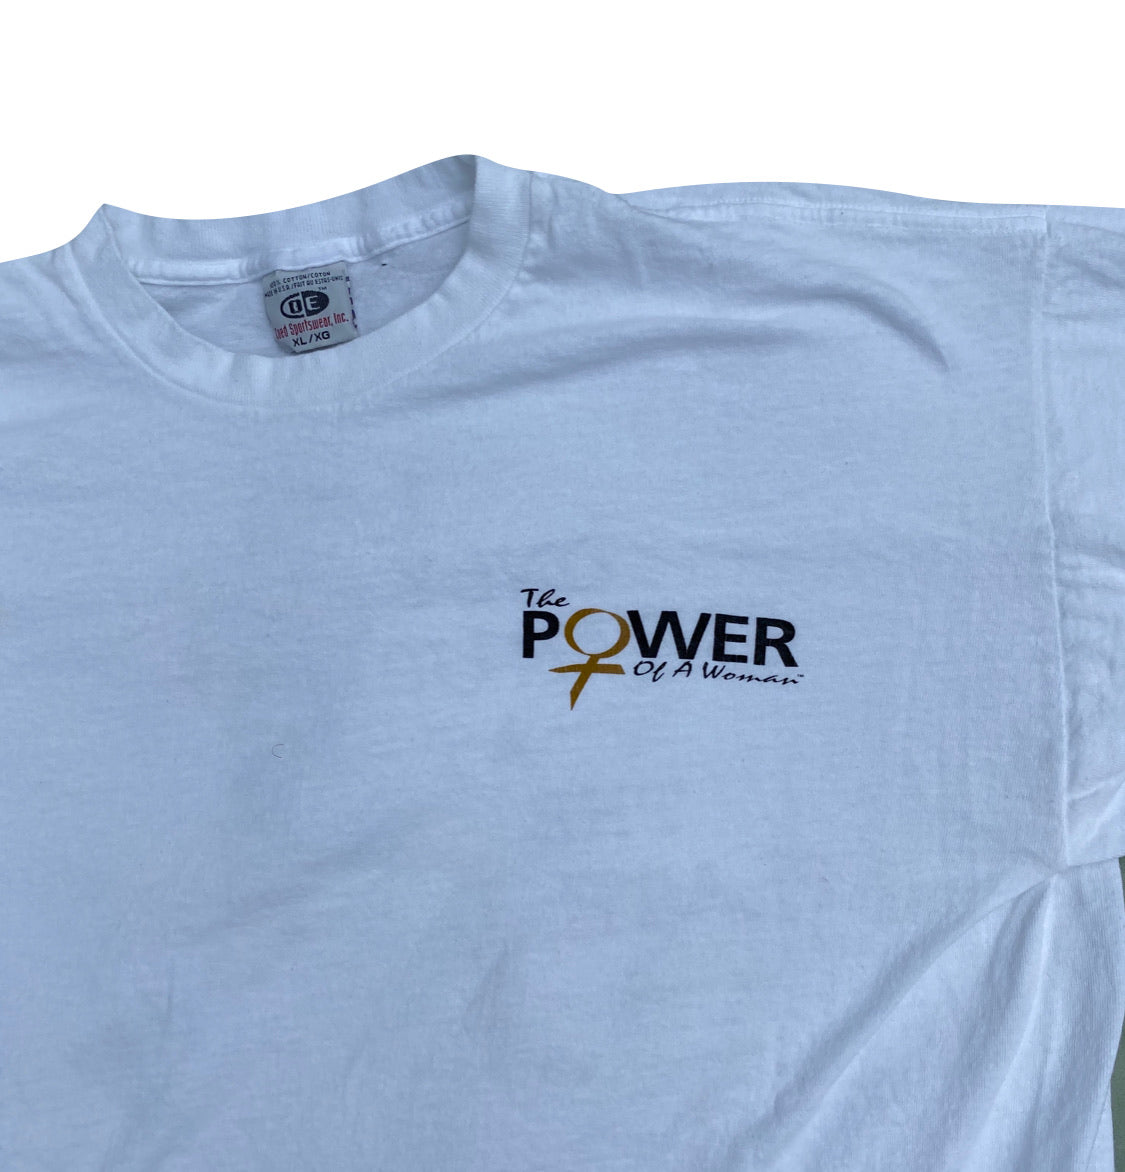 90s Power of a woman tee XL